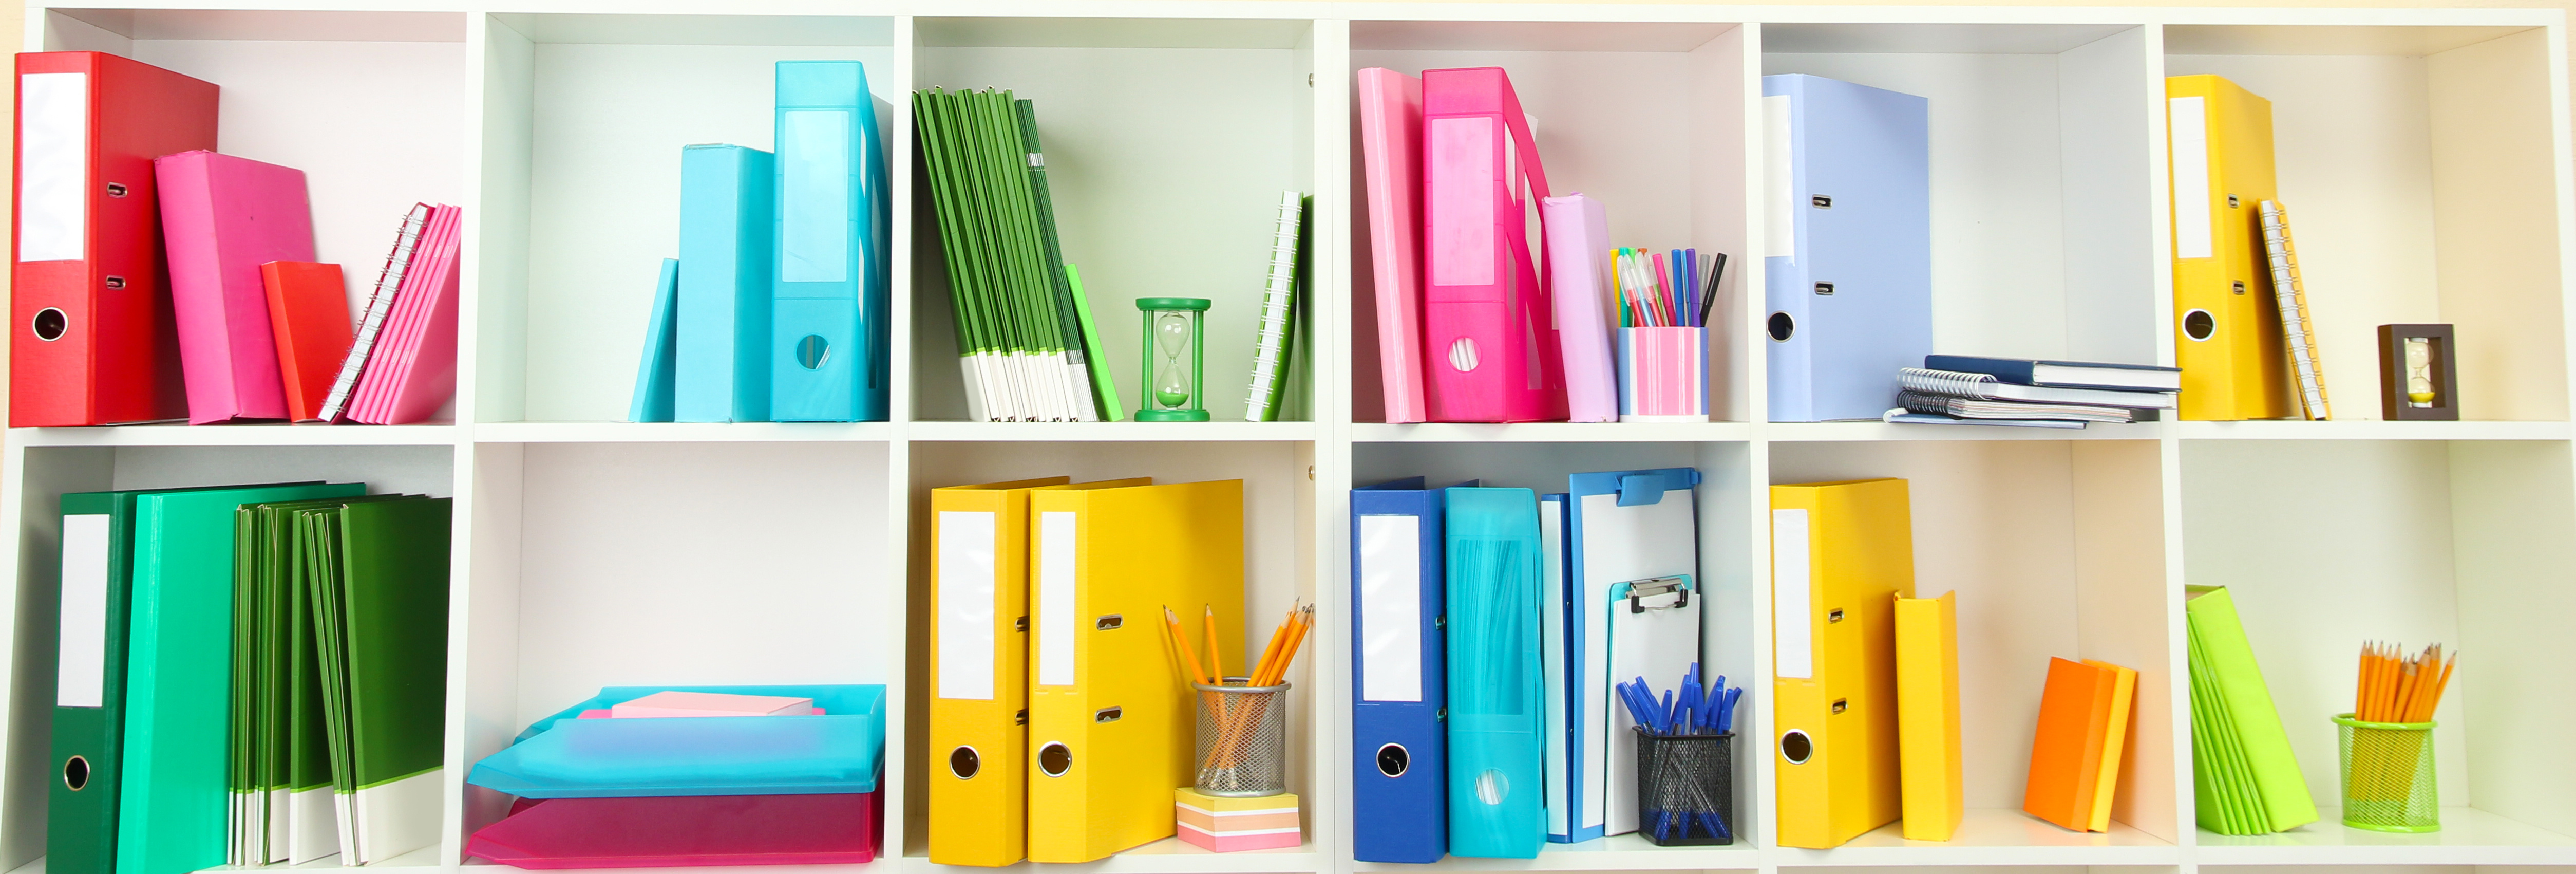 Colorful binders, pens, notebooks, and organizers